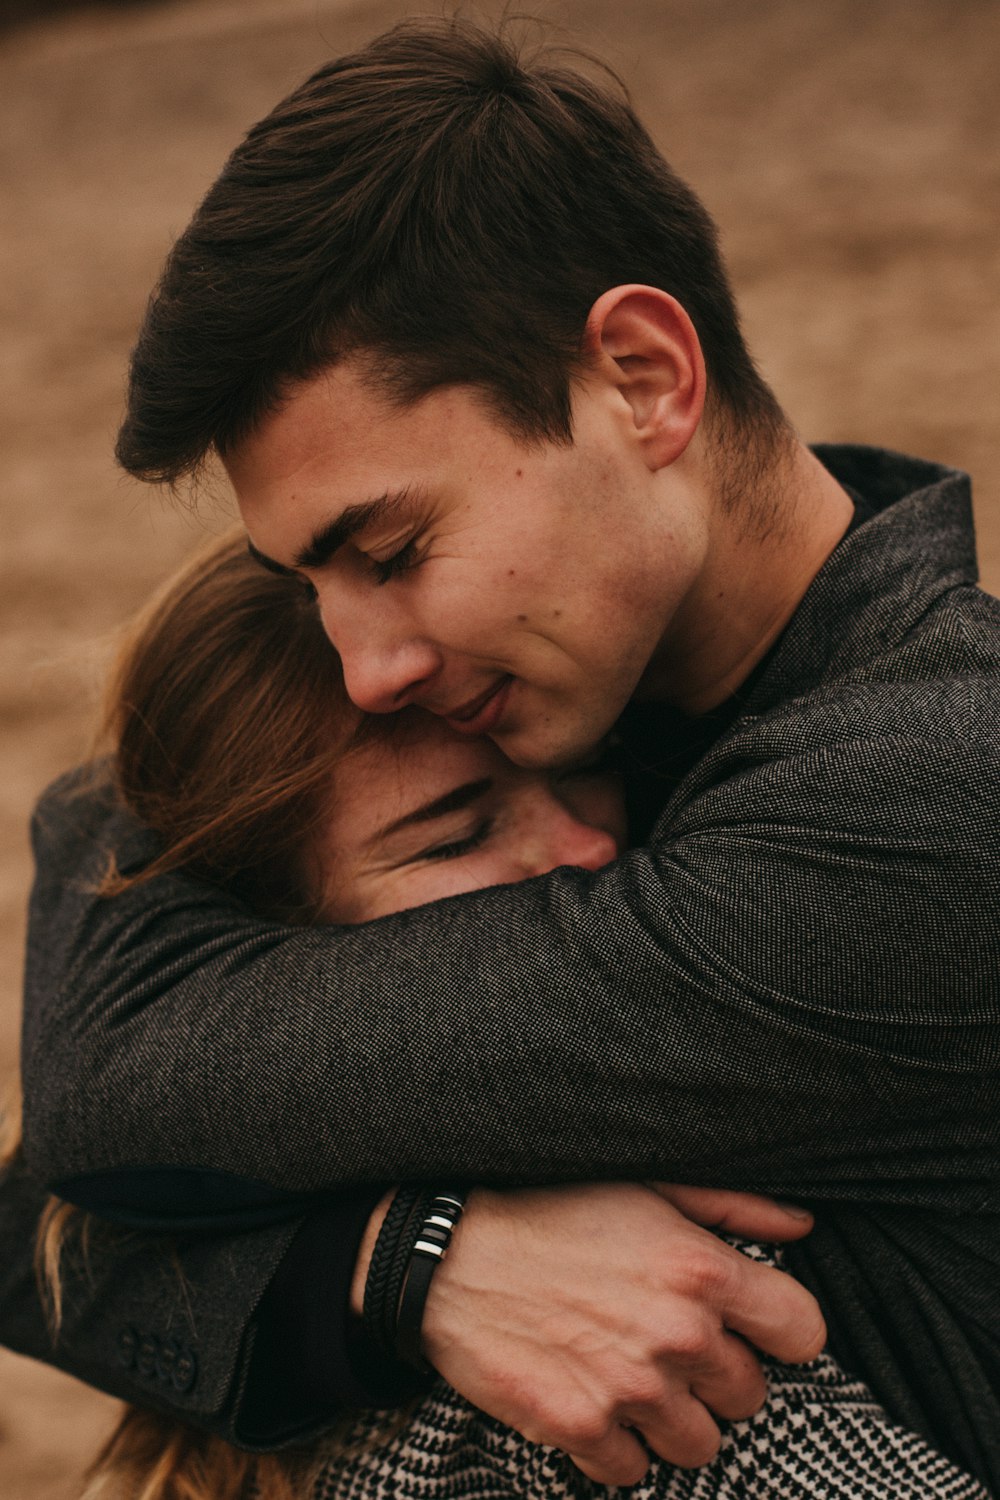 Incredible Compilation of Over 999 Tight Hug Photos – Stunning Collection in Full 4K Resolution